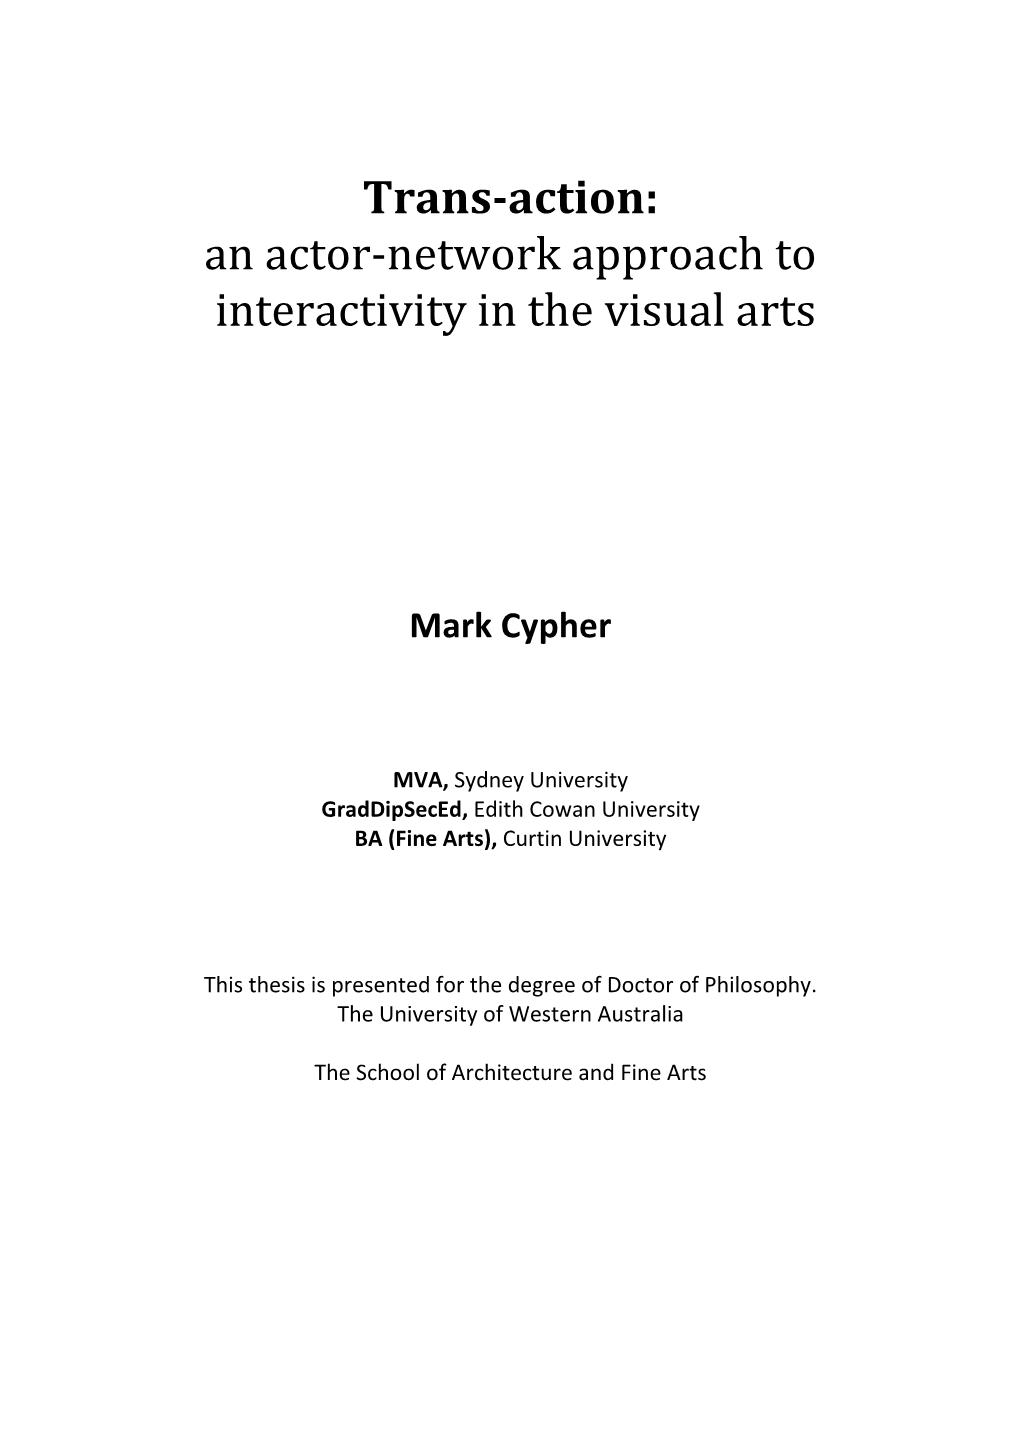 An Actor-Network Approach to Interactivity in the Visual Arts